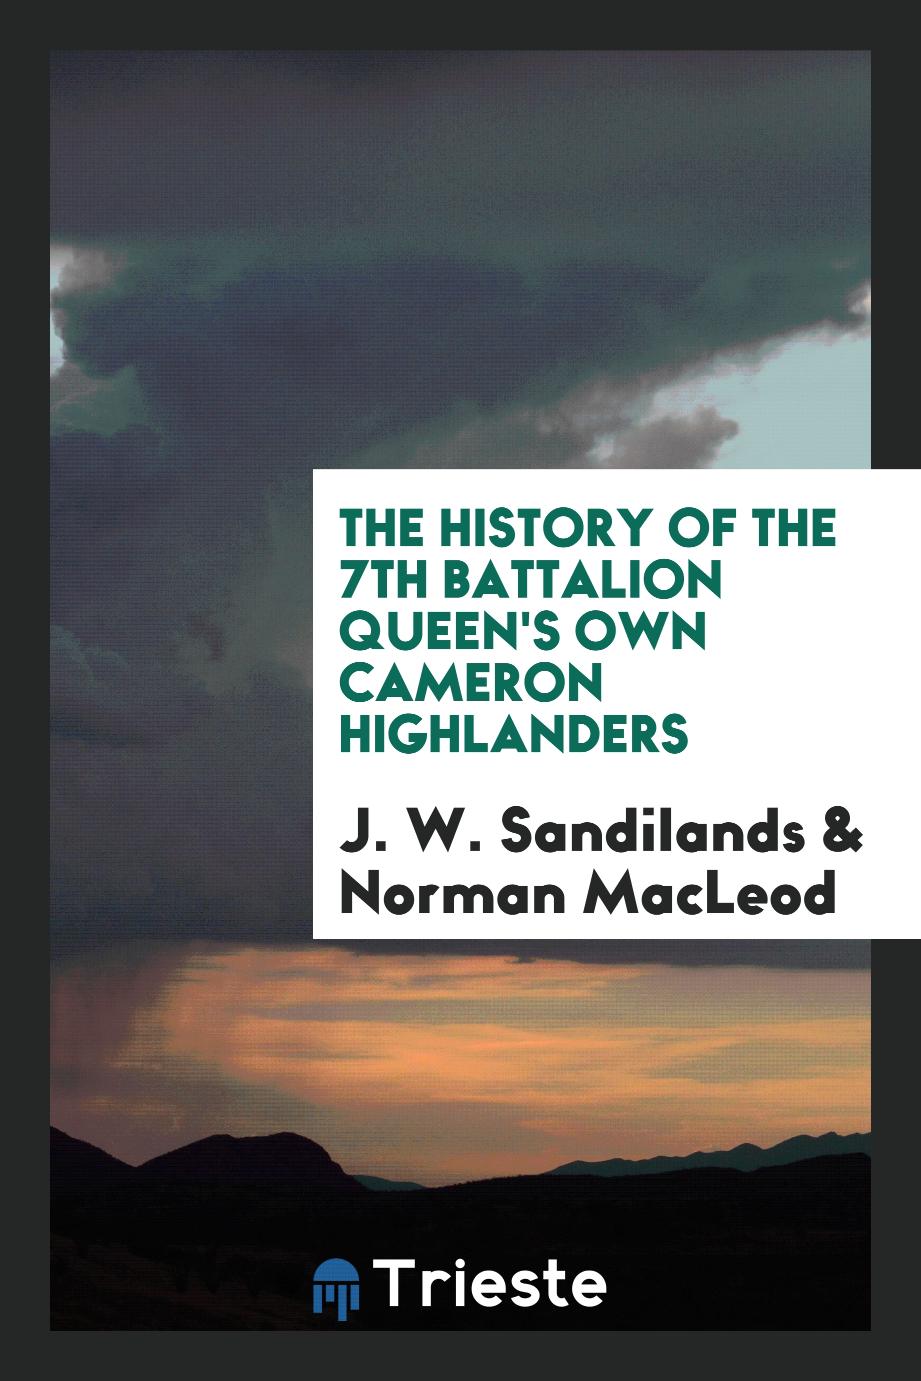 The history of the 7th Battalion Queen's Own Cameron Highlanders